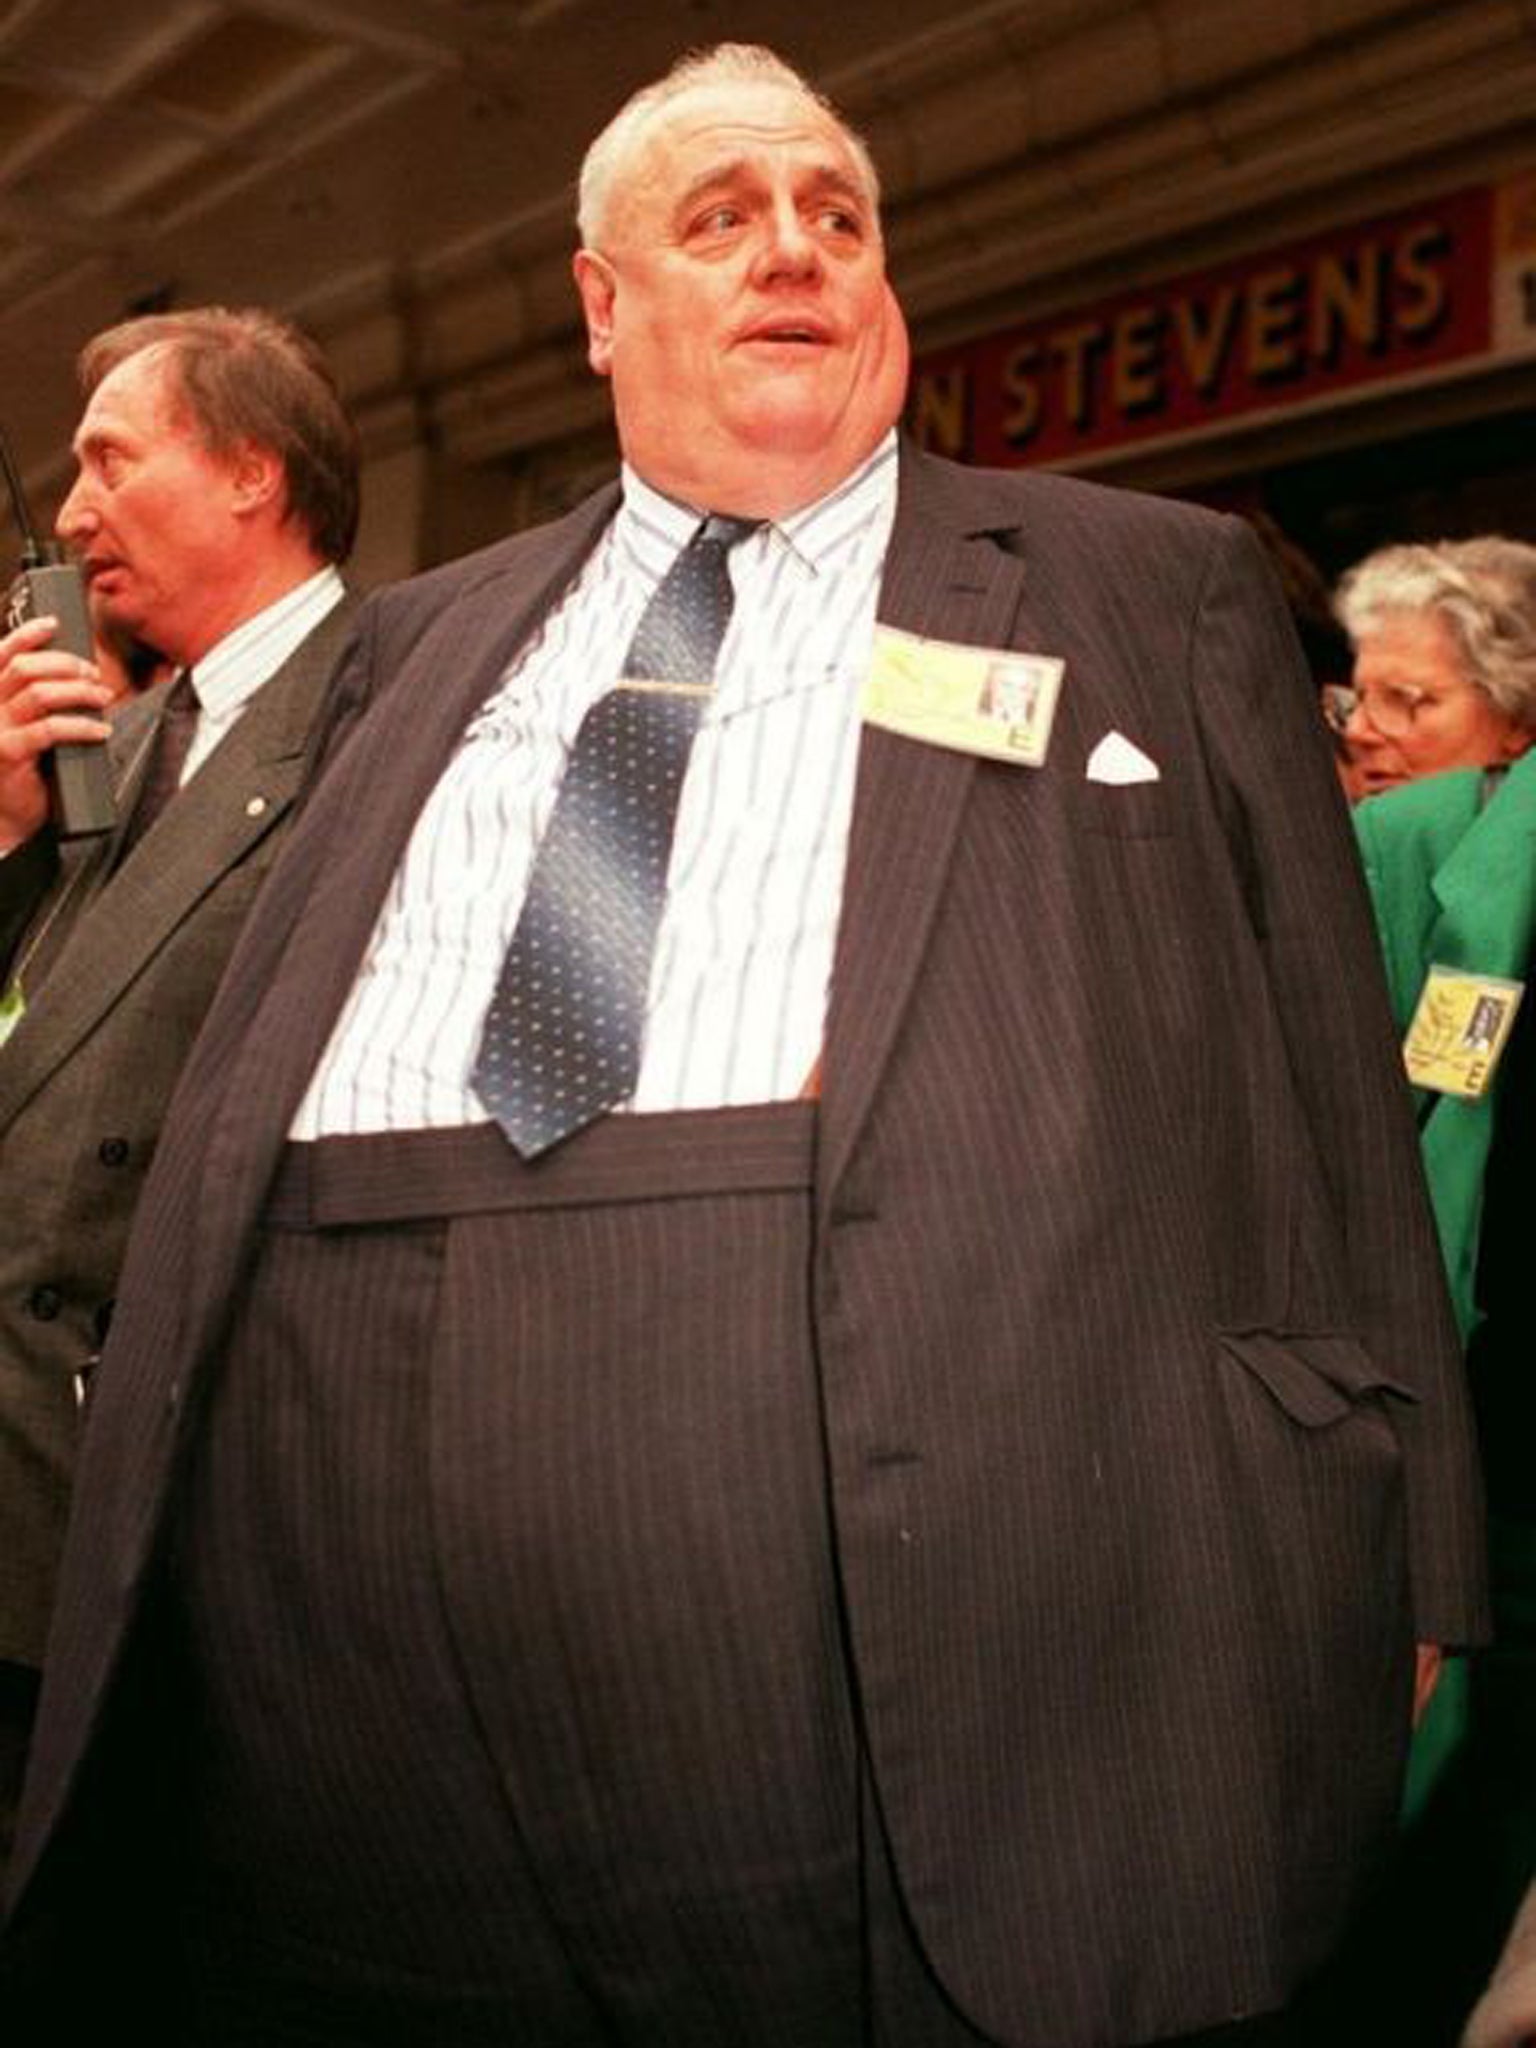 Cyril Smith, one of the best-known politicians of the 1970s and 1980s, escaped prosecution in 1970 for multiple indecent assaults on teenaged boys despite matching allegations against from eight men, according to prosecution filed released by the Crown Prosecution Service